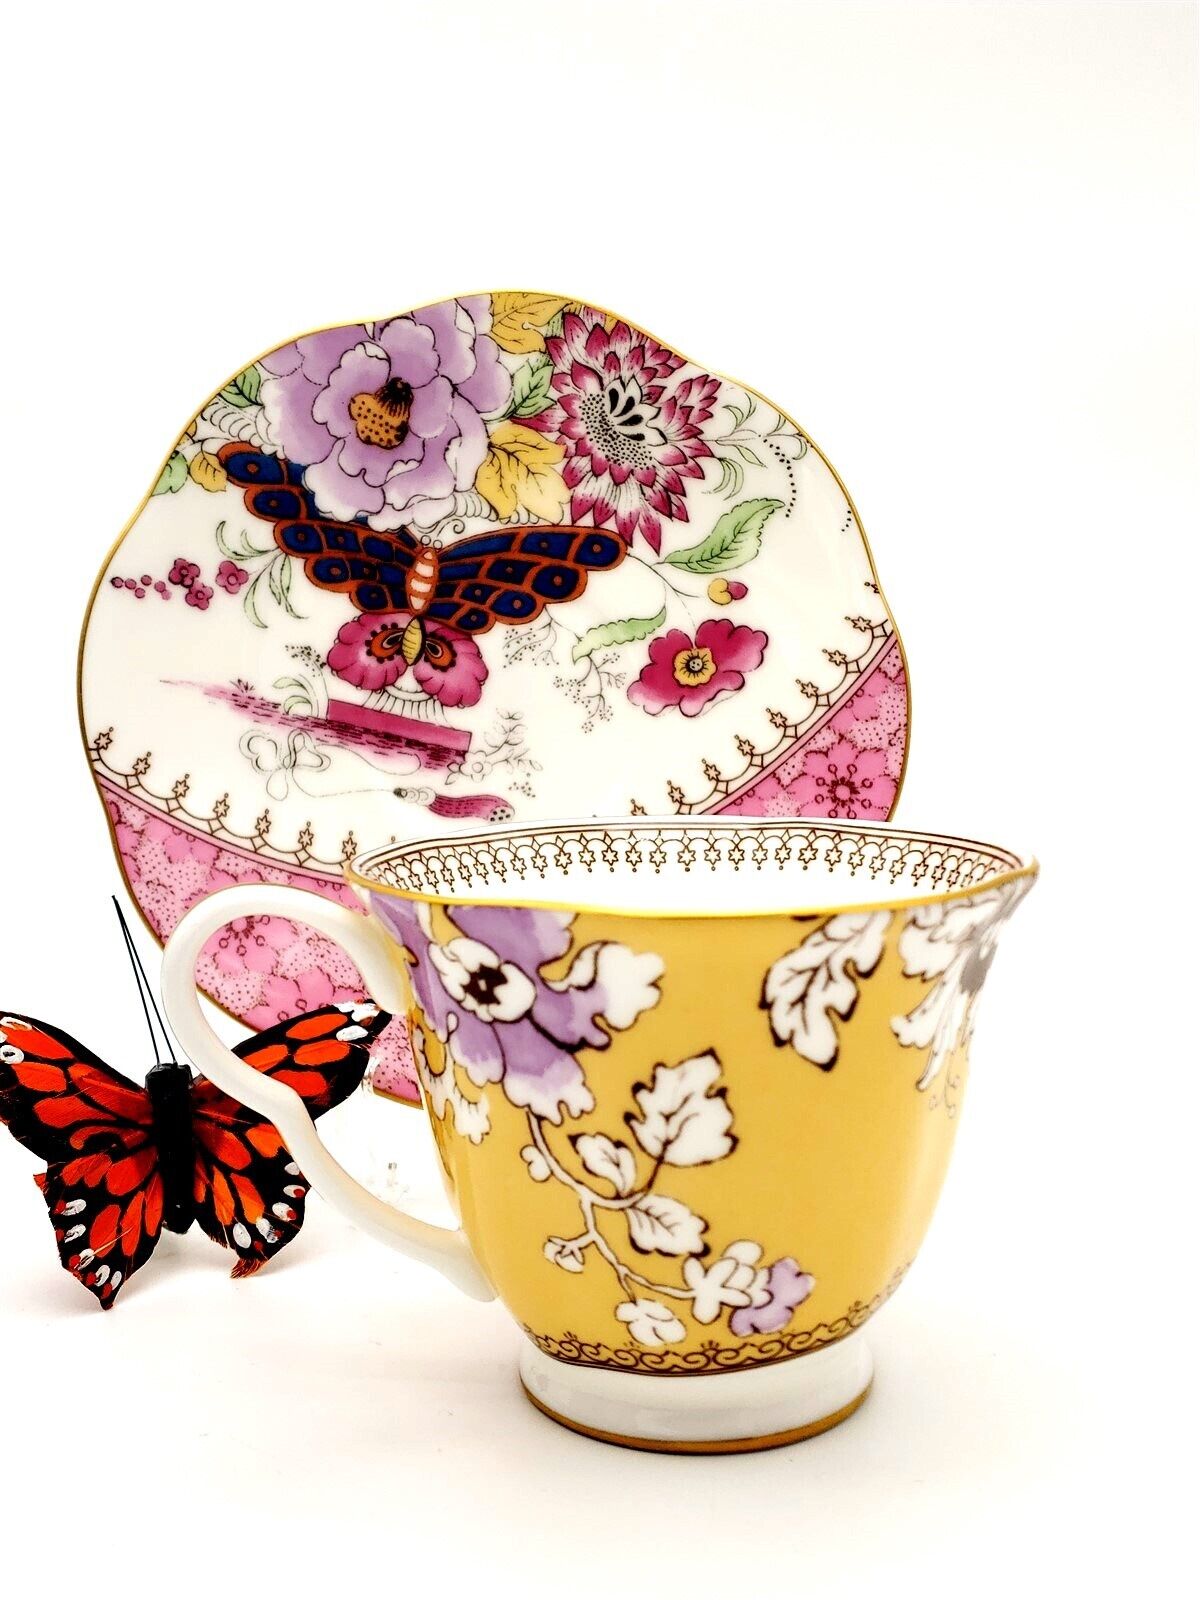 Wedgwood Butterfly Bloom Teacup & Saucer - Tea Story Collection Boxed